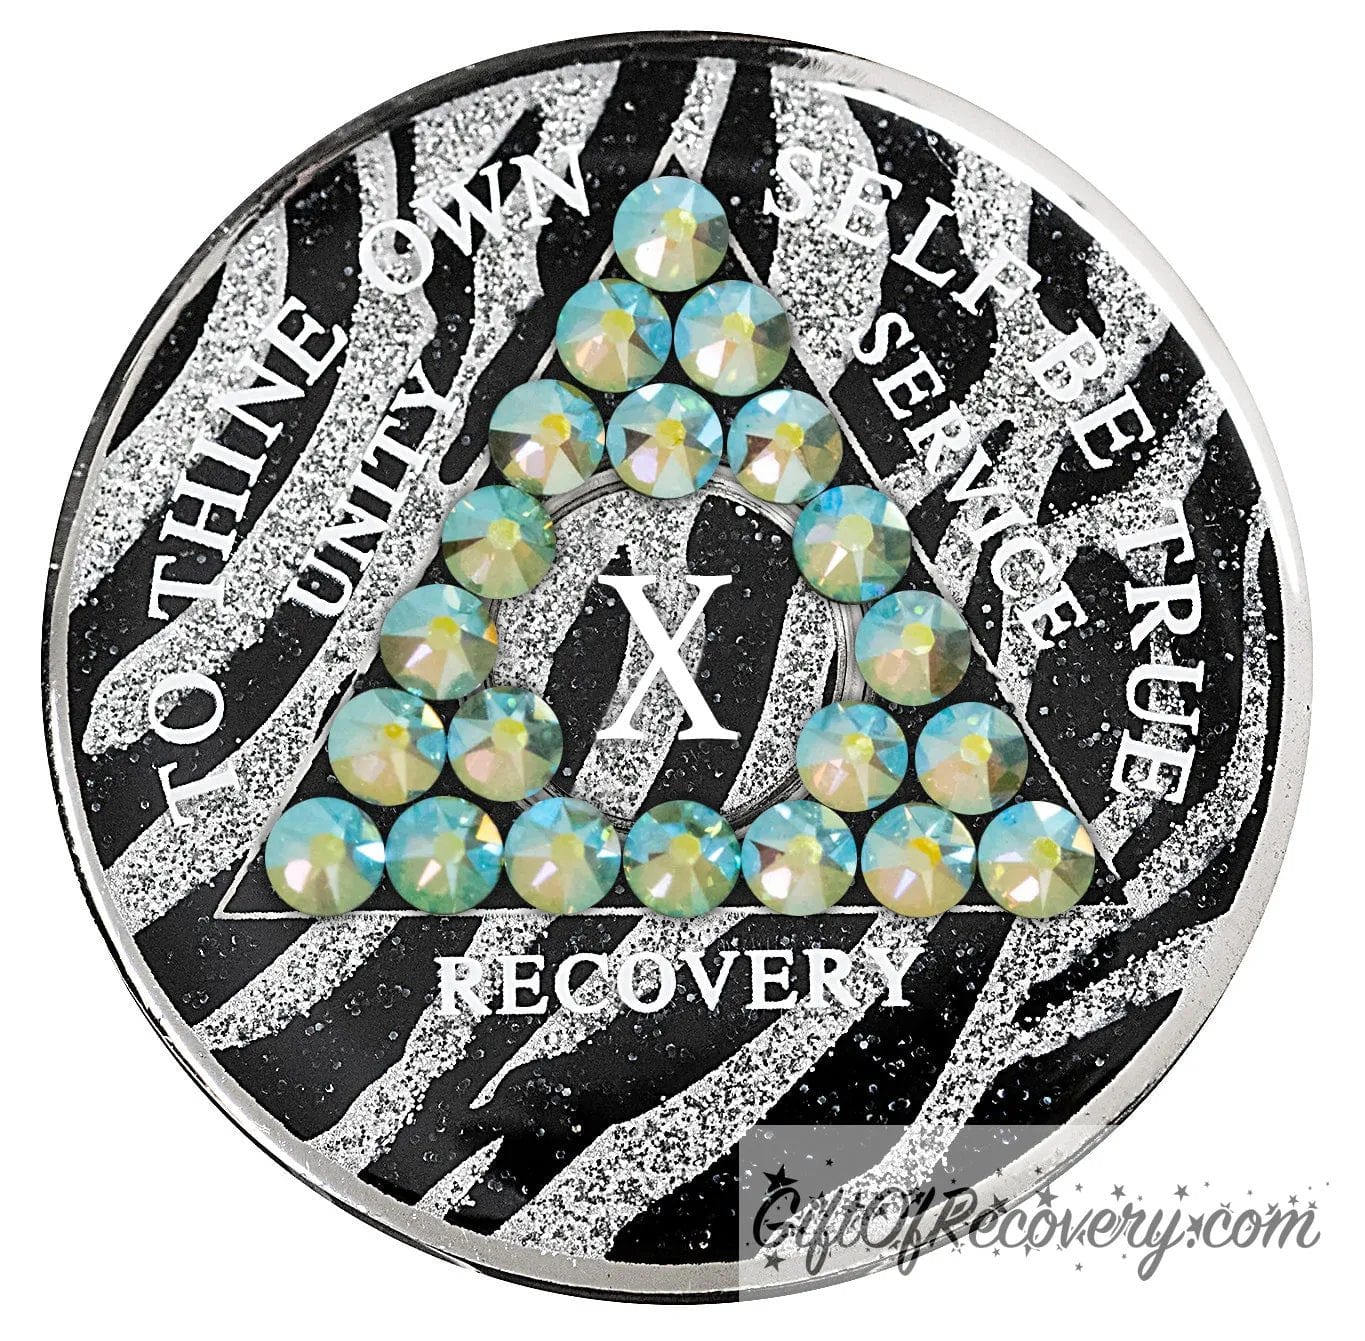 10 year Zebra glitter style AA medallion with 21 genuine peridot crystals, AA moto, unity, service, recovery, and roman numeral are in white and blend into the pattern, so you can let your recovery shine, not your time, the outer rim is silver plated, sealed in a high-quality, chip and scratch-resistant resin dome giving it a beautiful glossy look that will last.